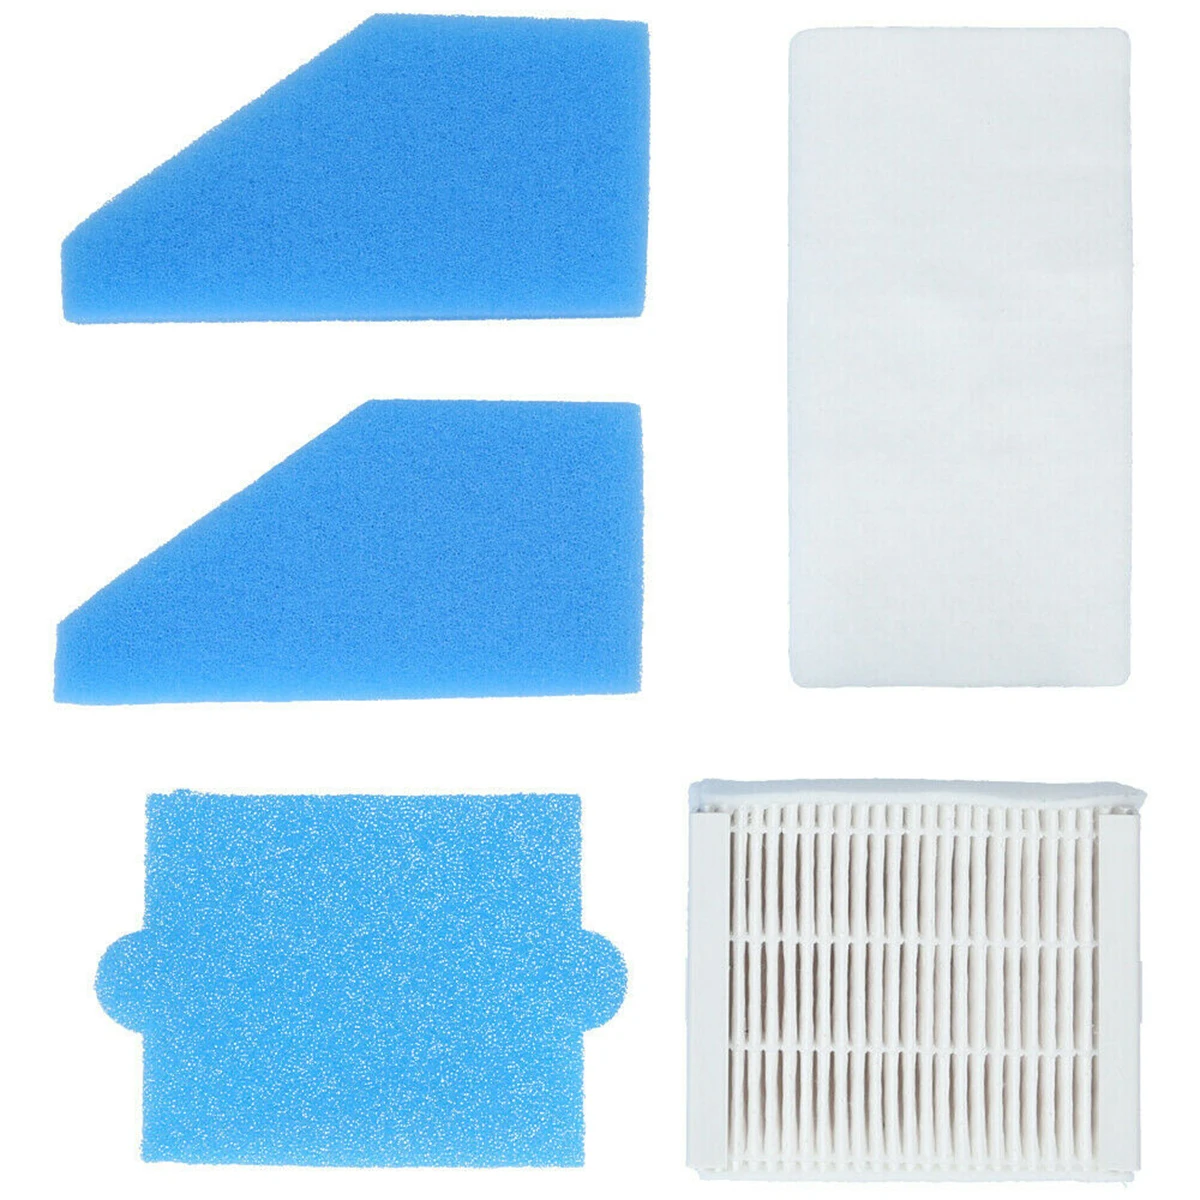 

Filter Set 5 Pieces Suitable For Thomas AQUA + Anti Allergy, AQUA + Pet & Family Household Sweeper Cleaning Tool Replacement 5pc